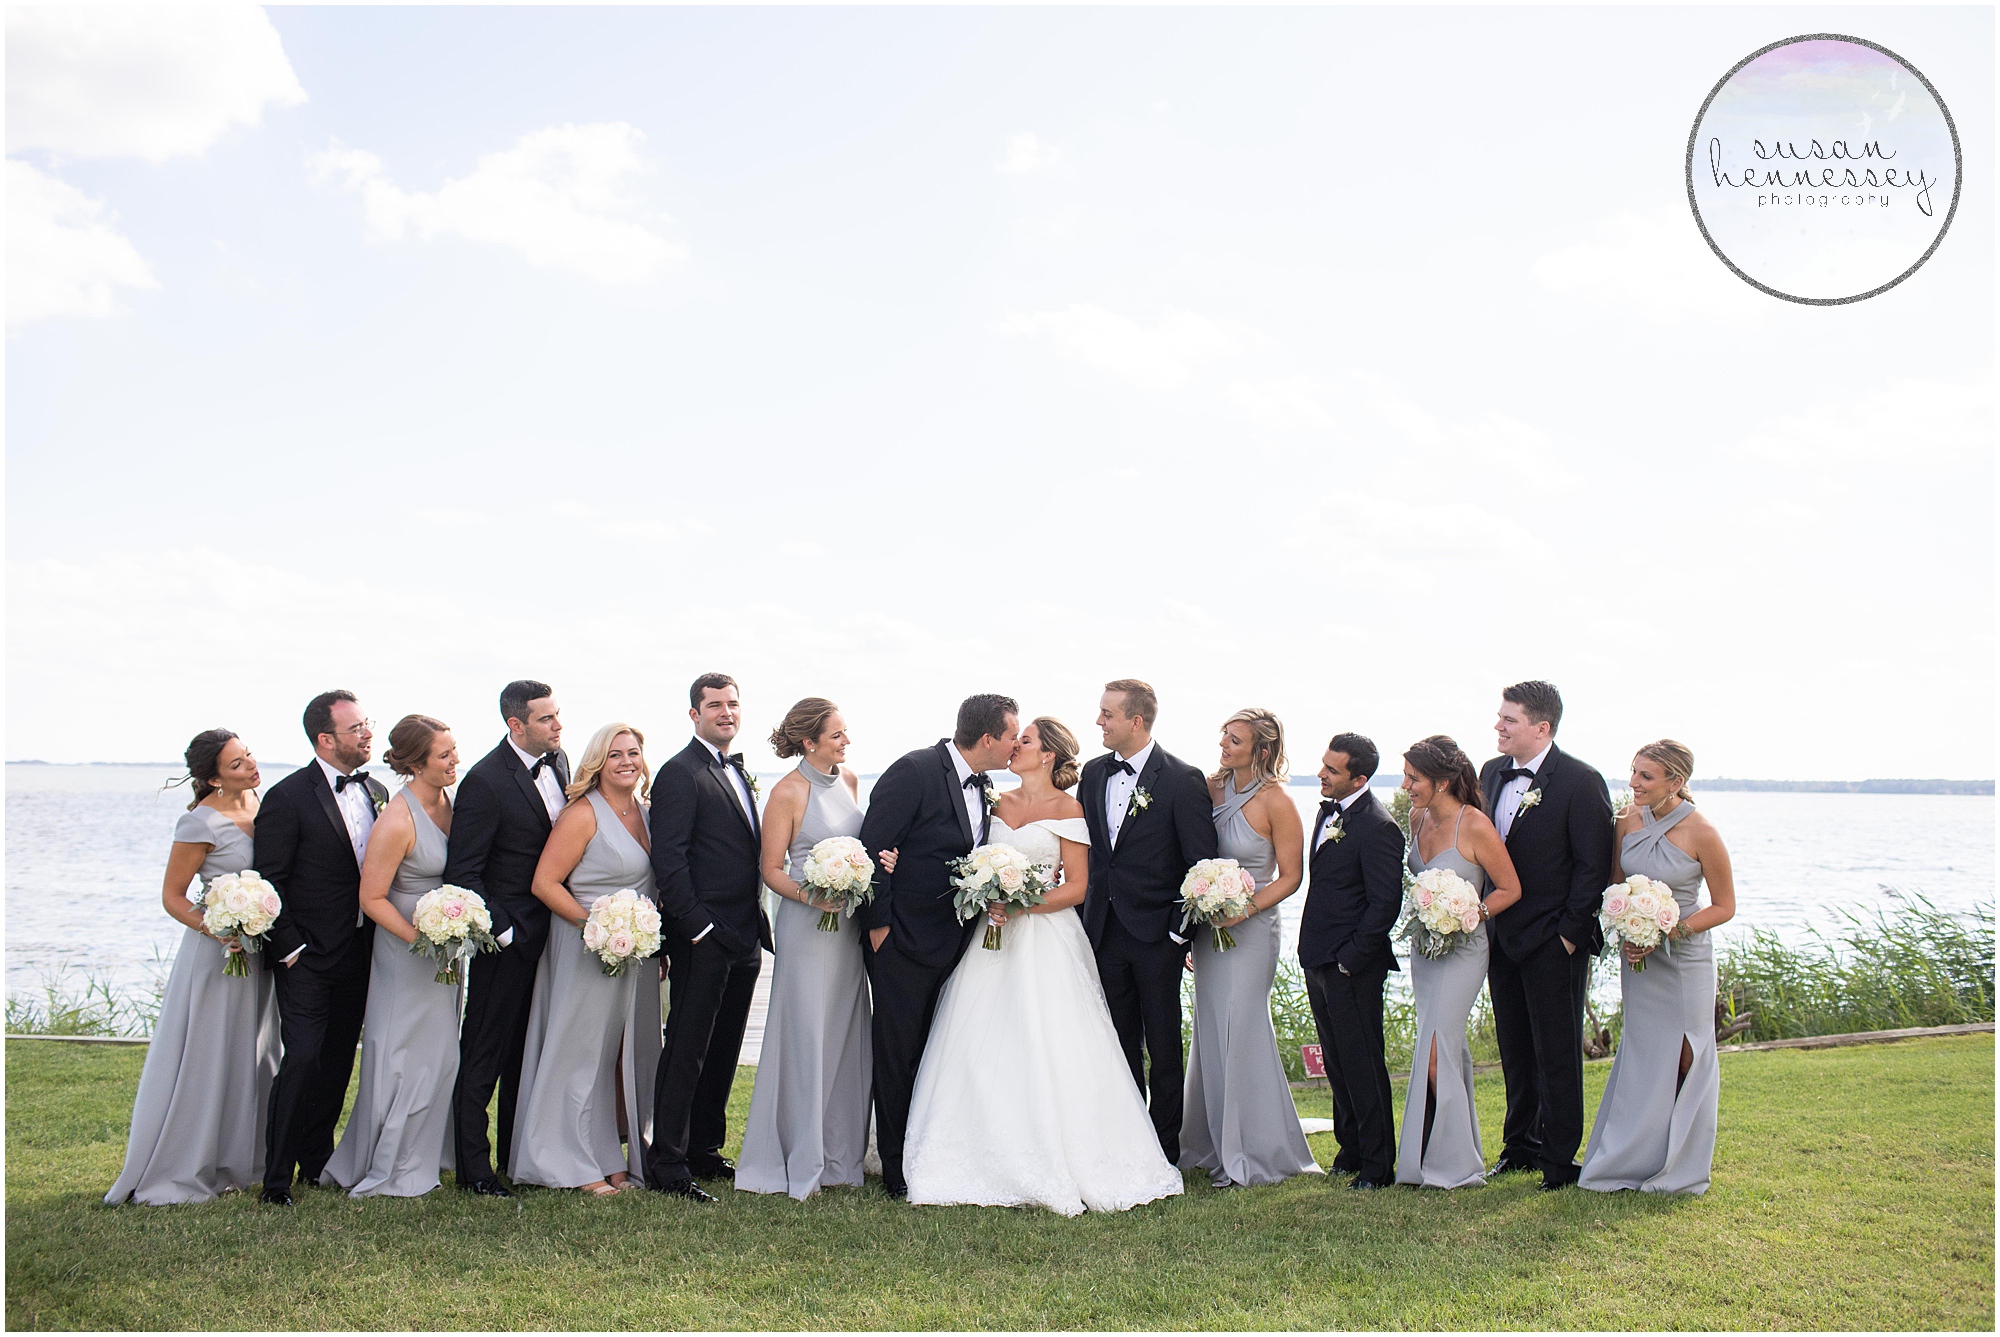 Bride and groom kiss with their bridal party looking on